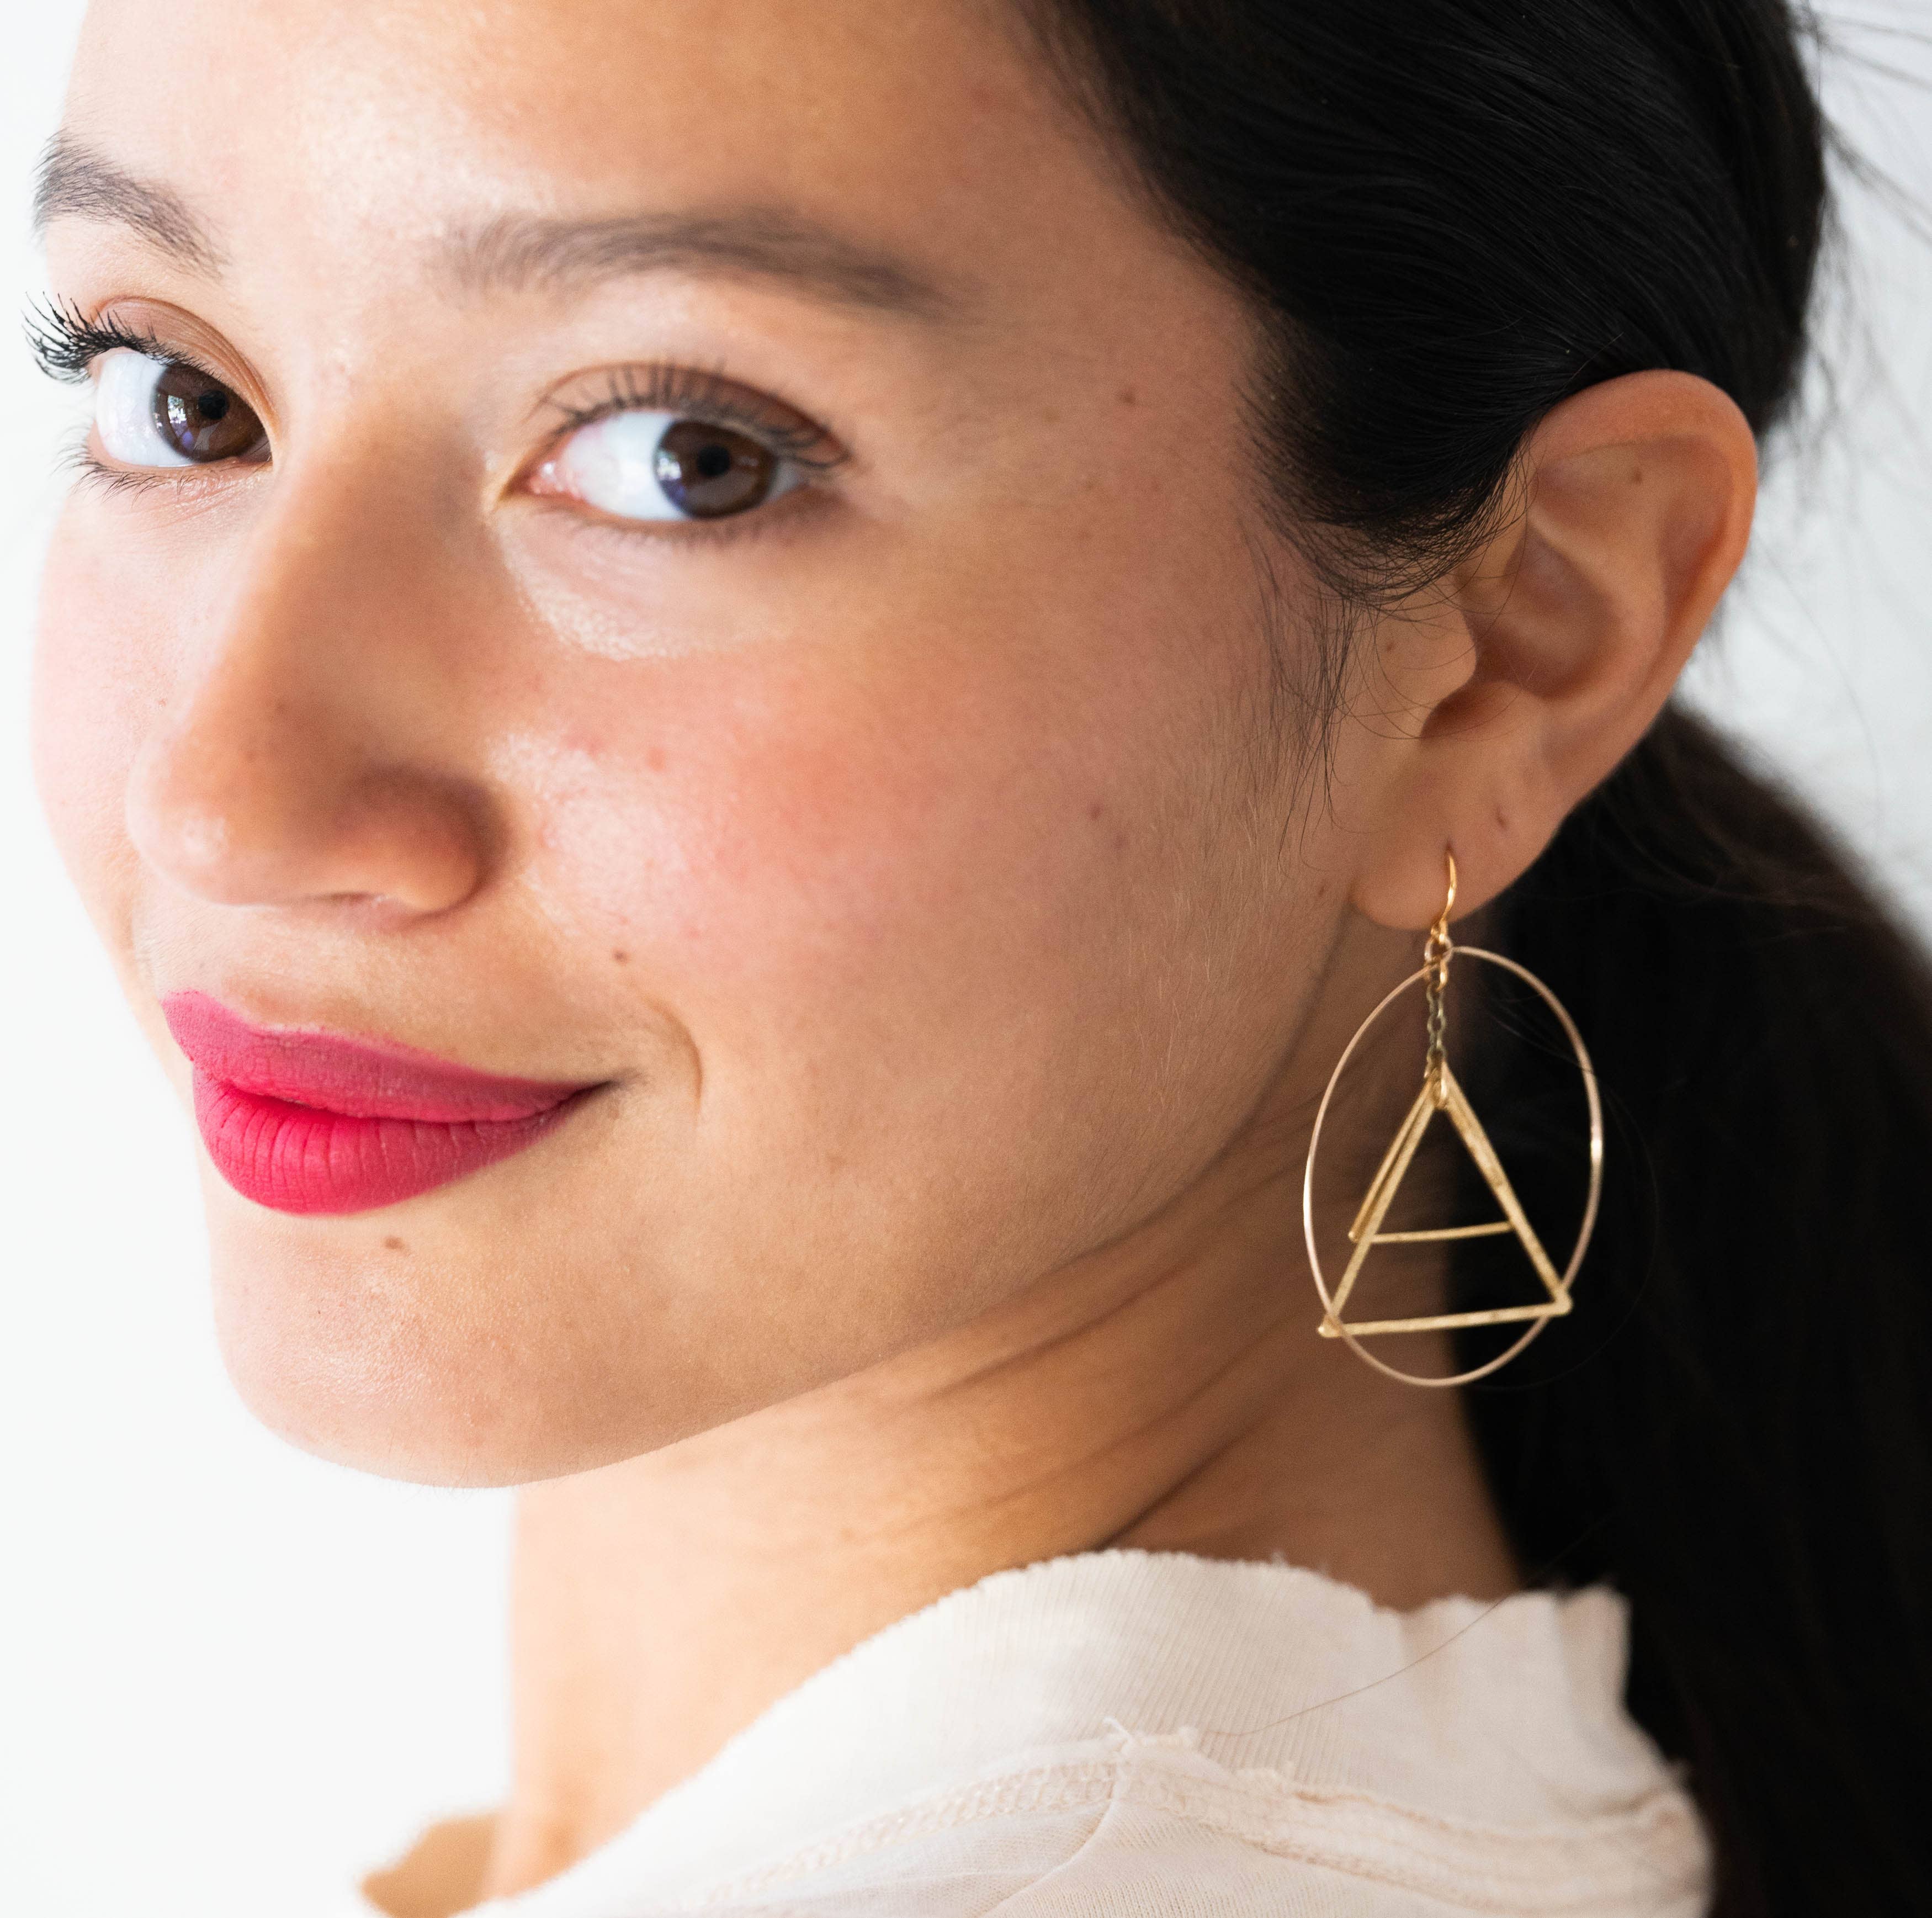 Mobile (Triangle and Hoop) earrings